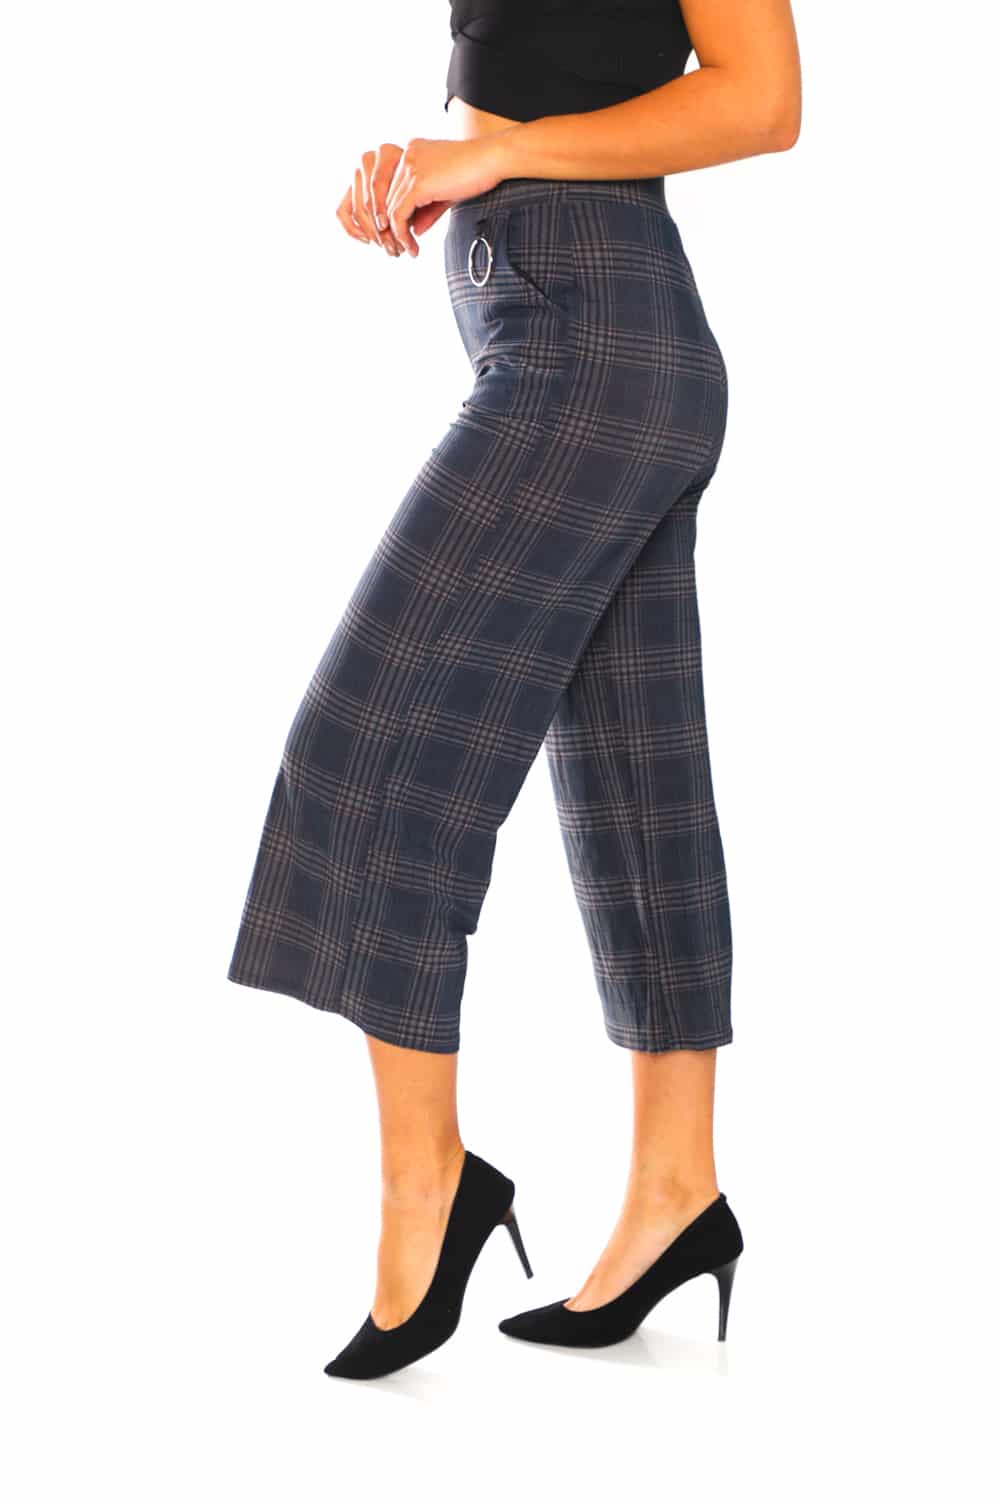 Below Knee Length Culotte Pants with Pockets - 3